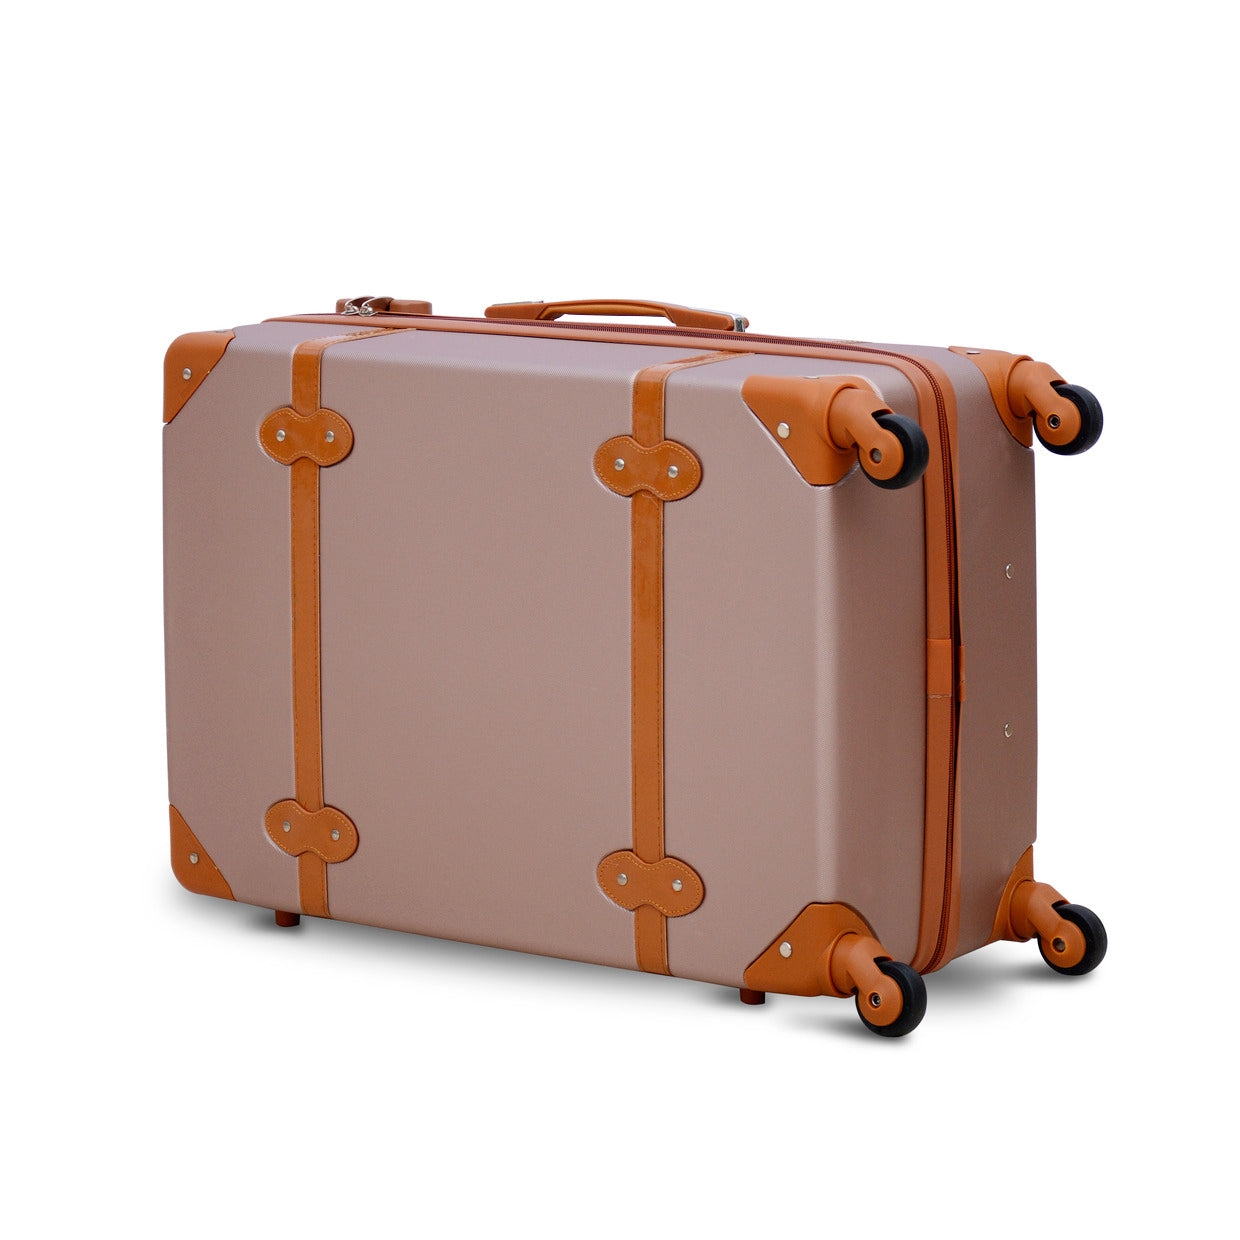 20" Corner Guard Lightweight ABS Luggage | Brown And Rose Gold Hard Case Trolley Bag